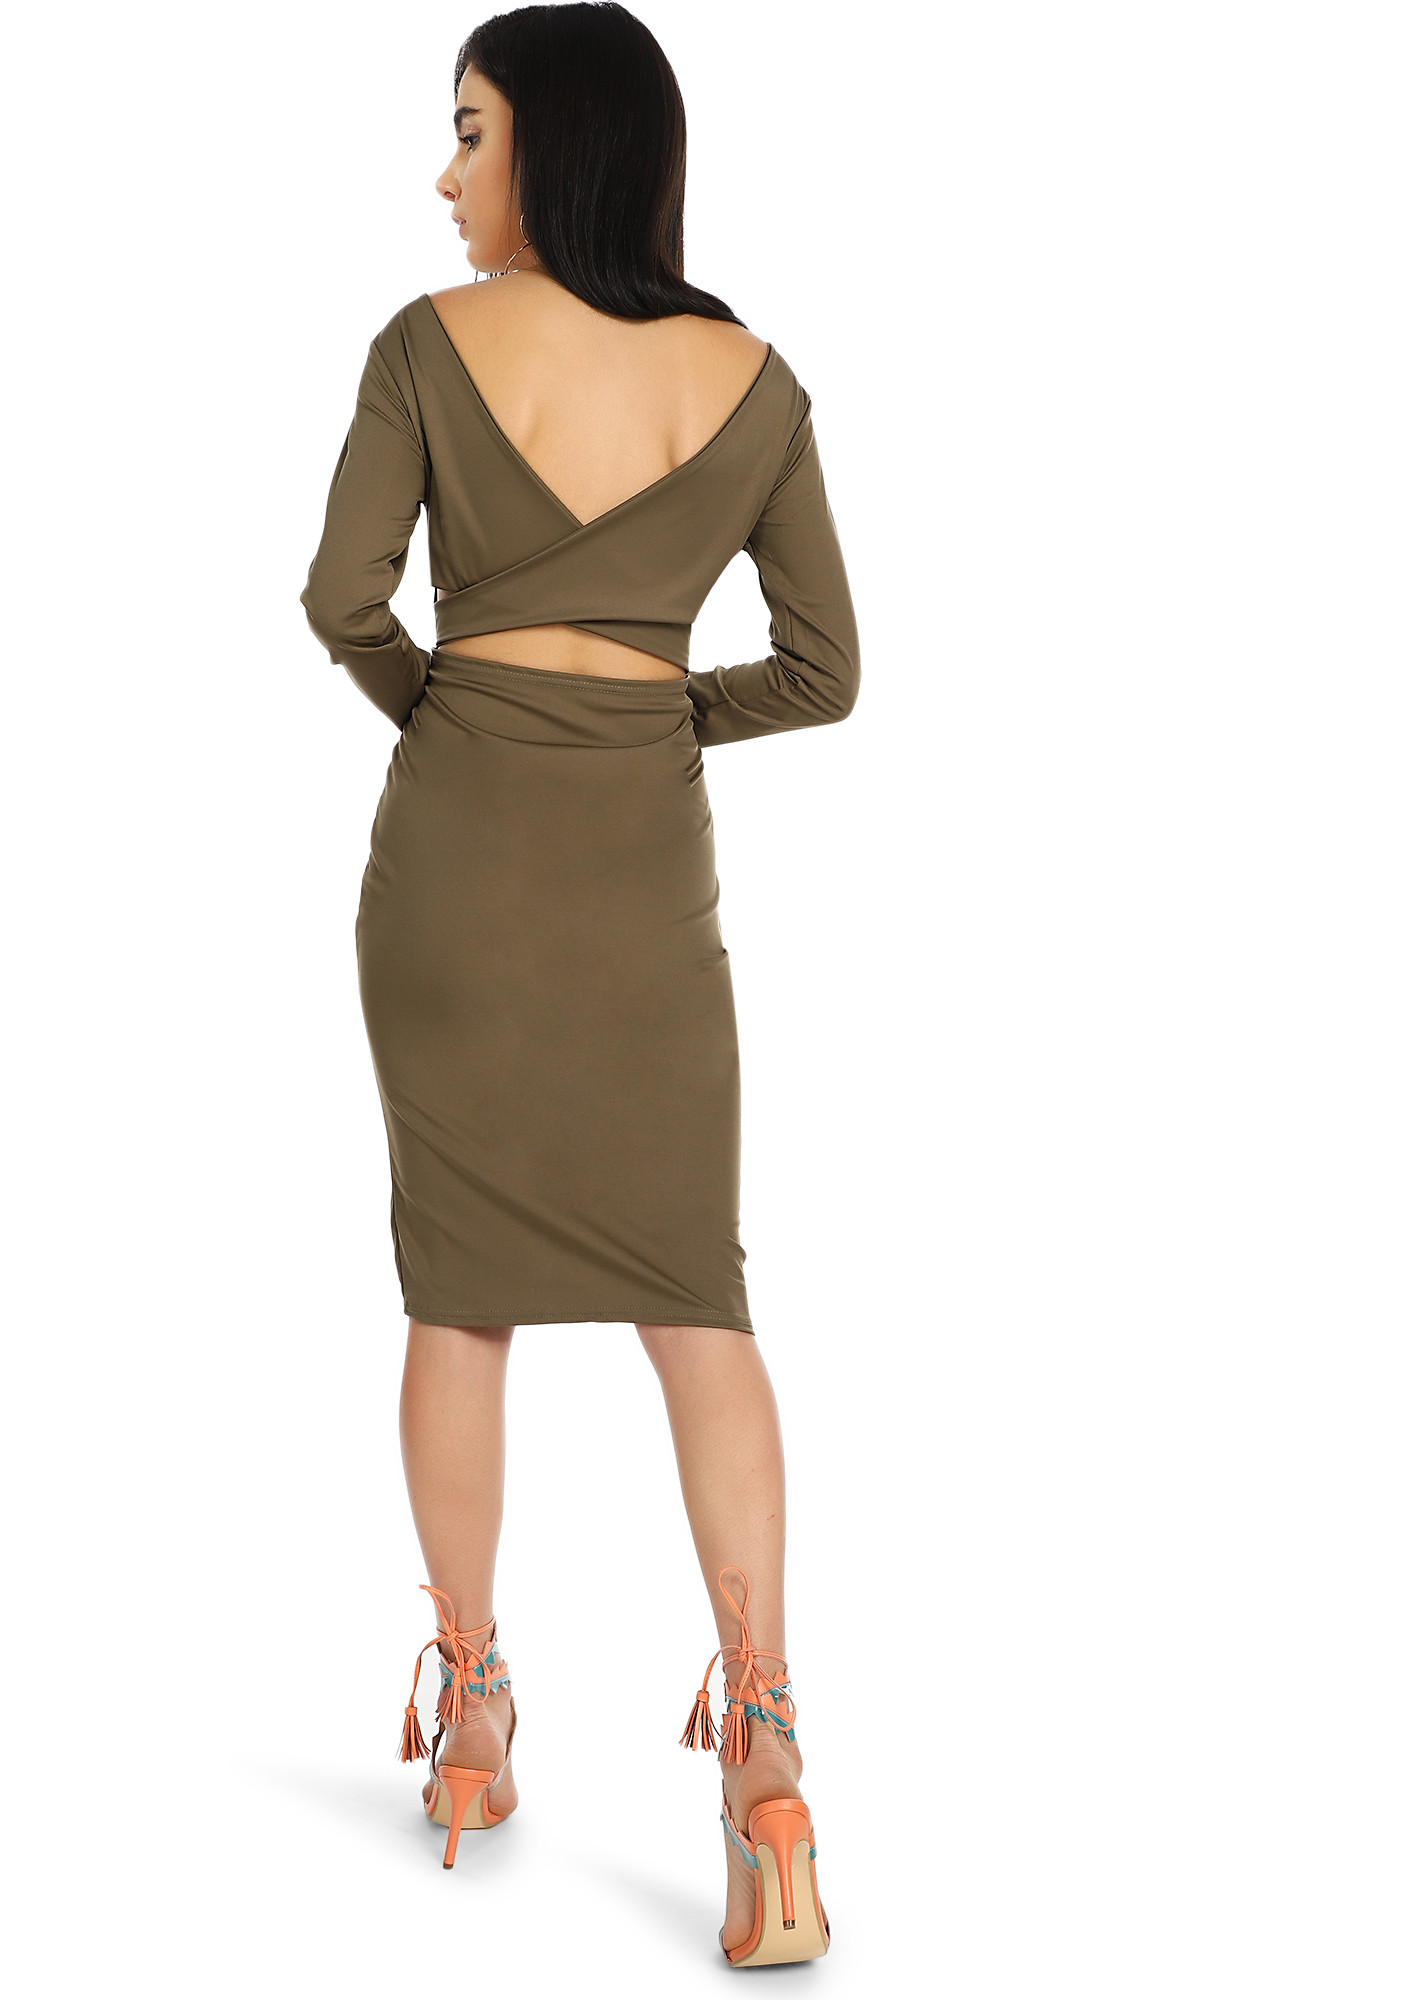 NEVER CARED MORE COFFEE BROWN PENCIL DRESS